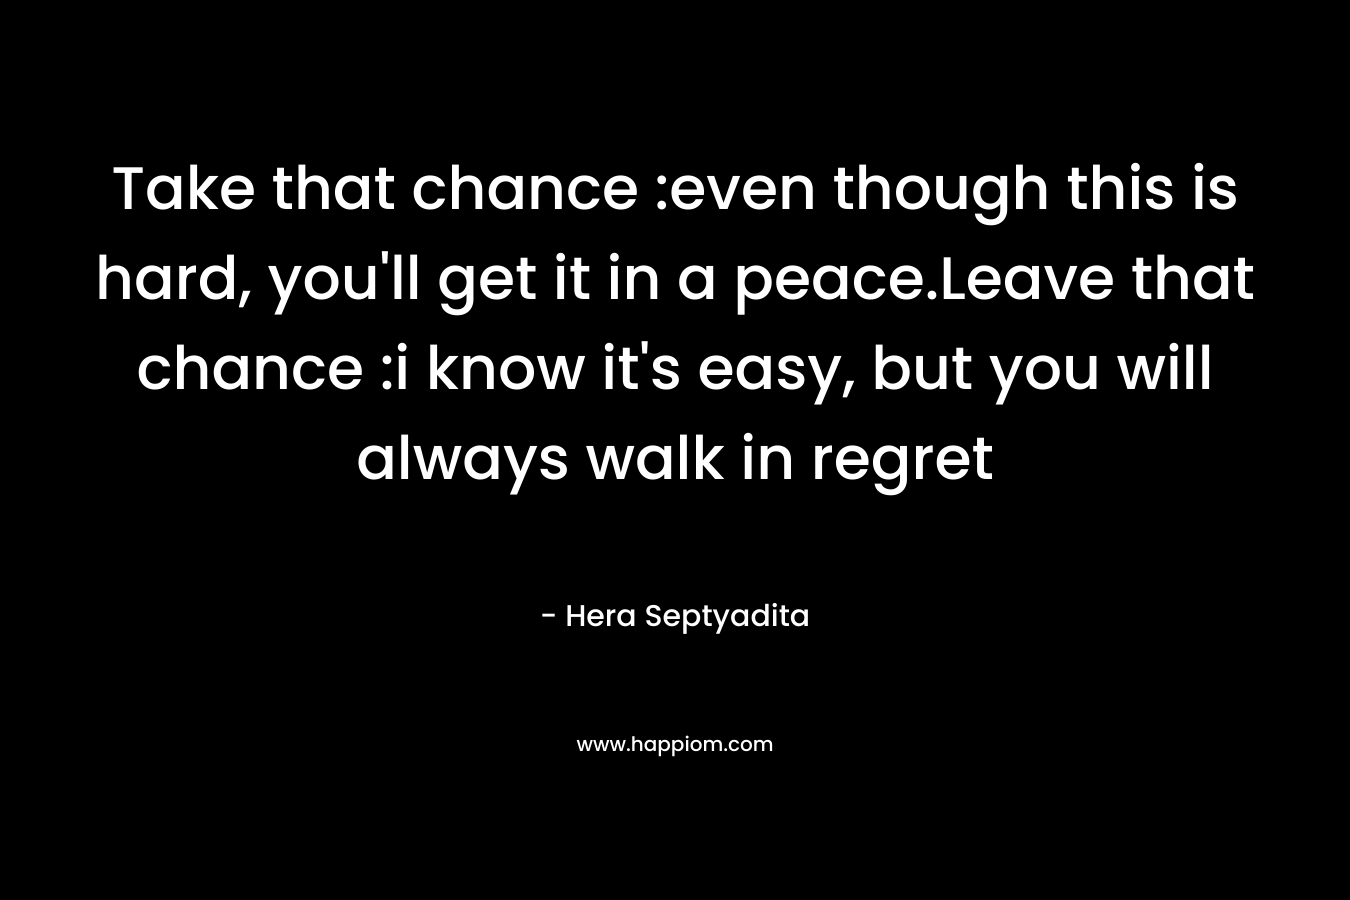 Take that chance :even though this is hard, you'll get it in a peace.Leave that chance :i know it's easy, but you will always walk in regret